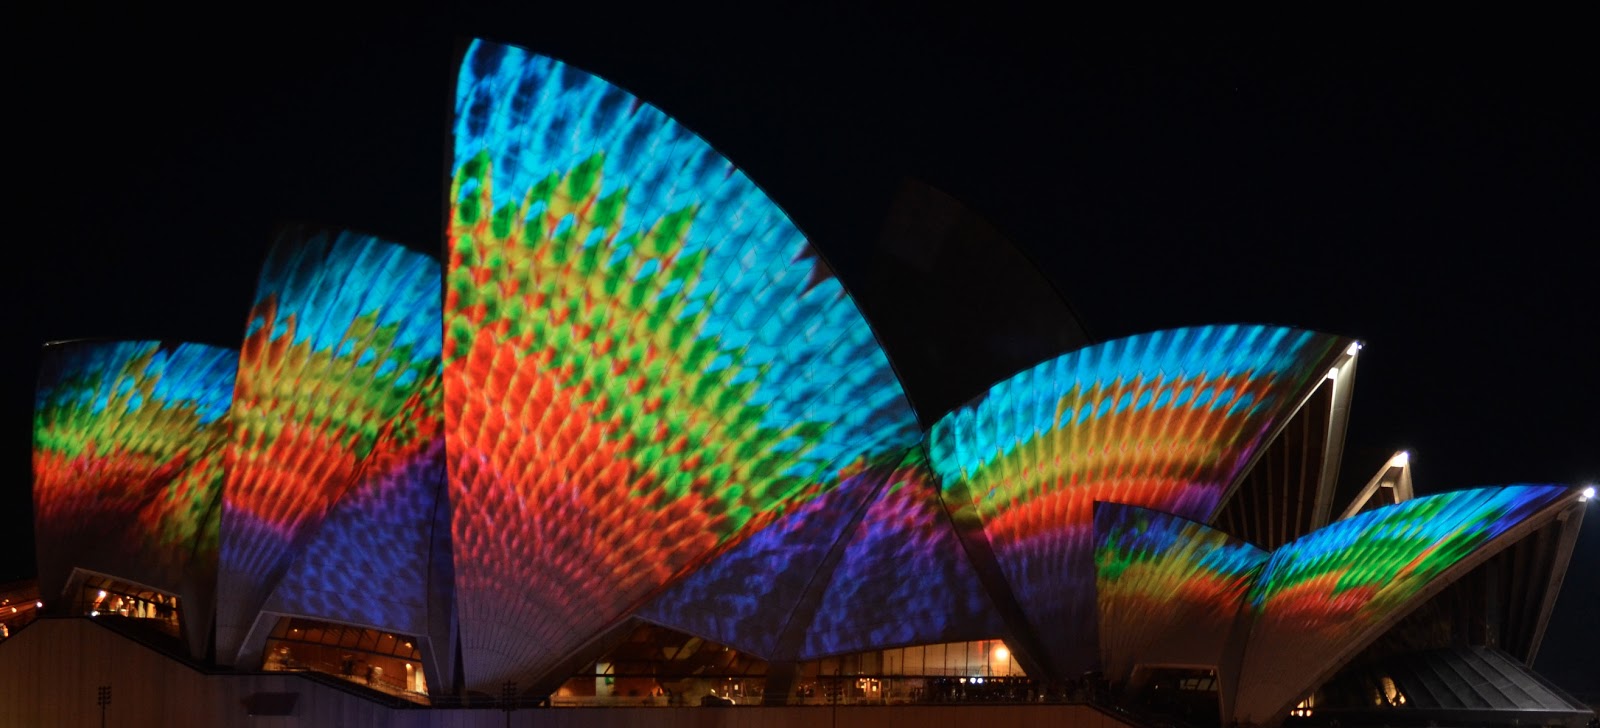 Photo of Buildings in Australia with Various Colorful Lights during the Nighttime